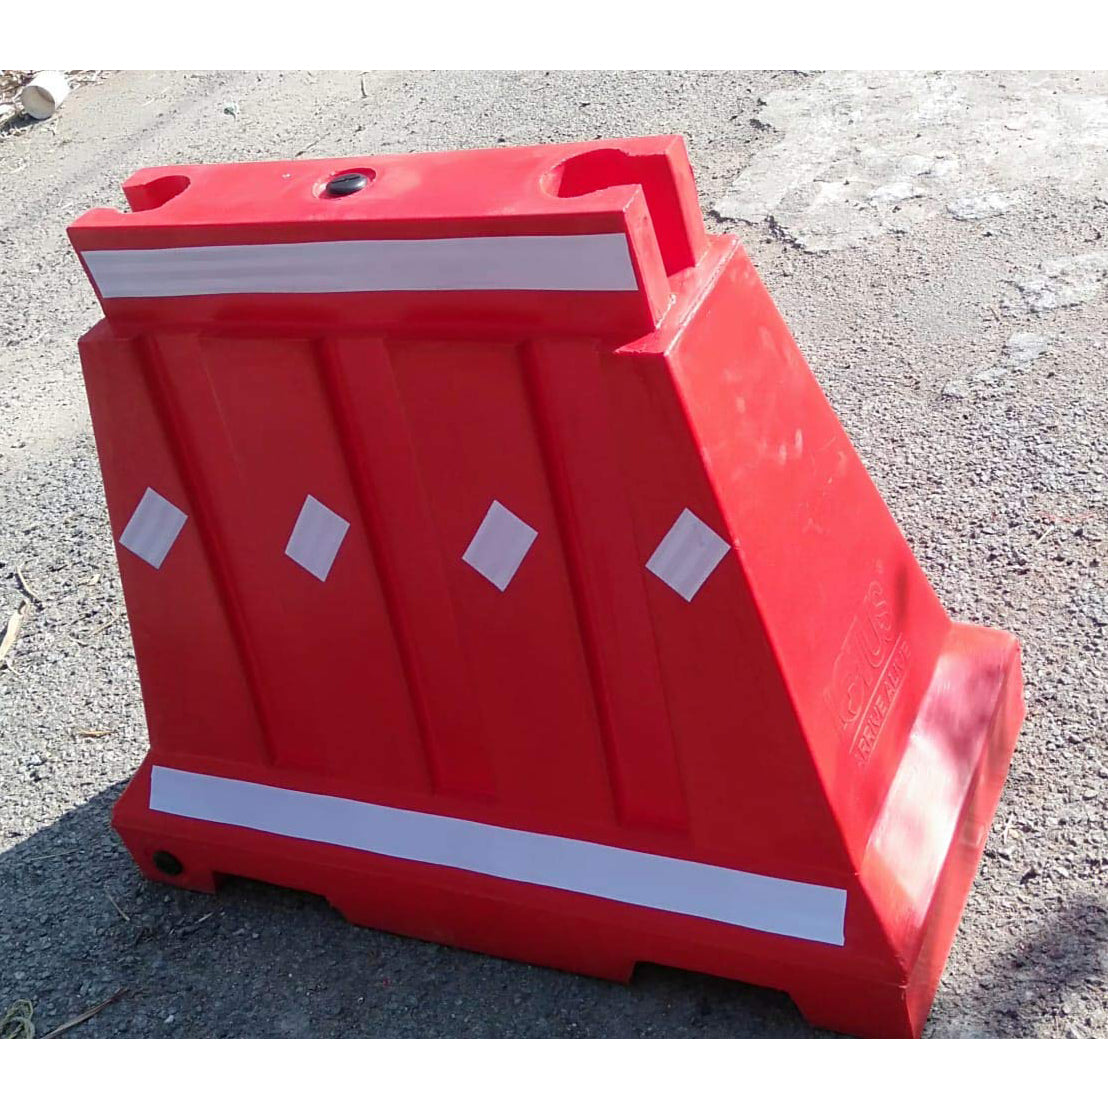 Road Safety Barrier